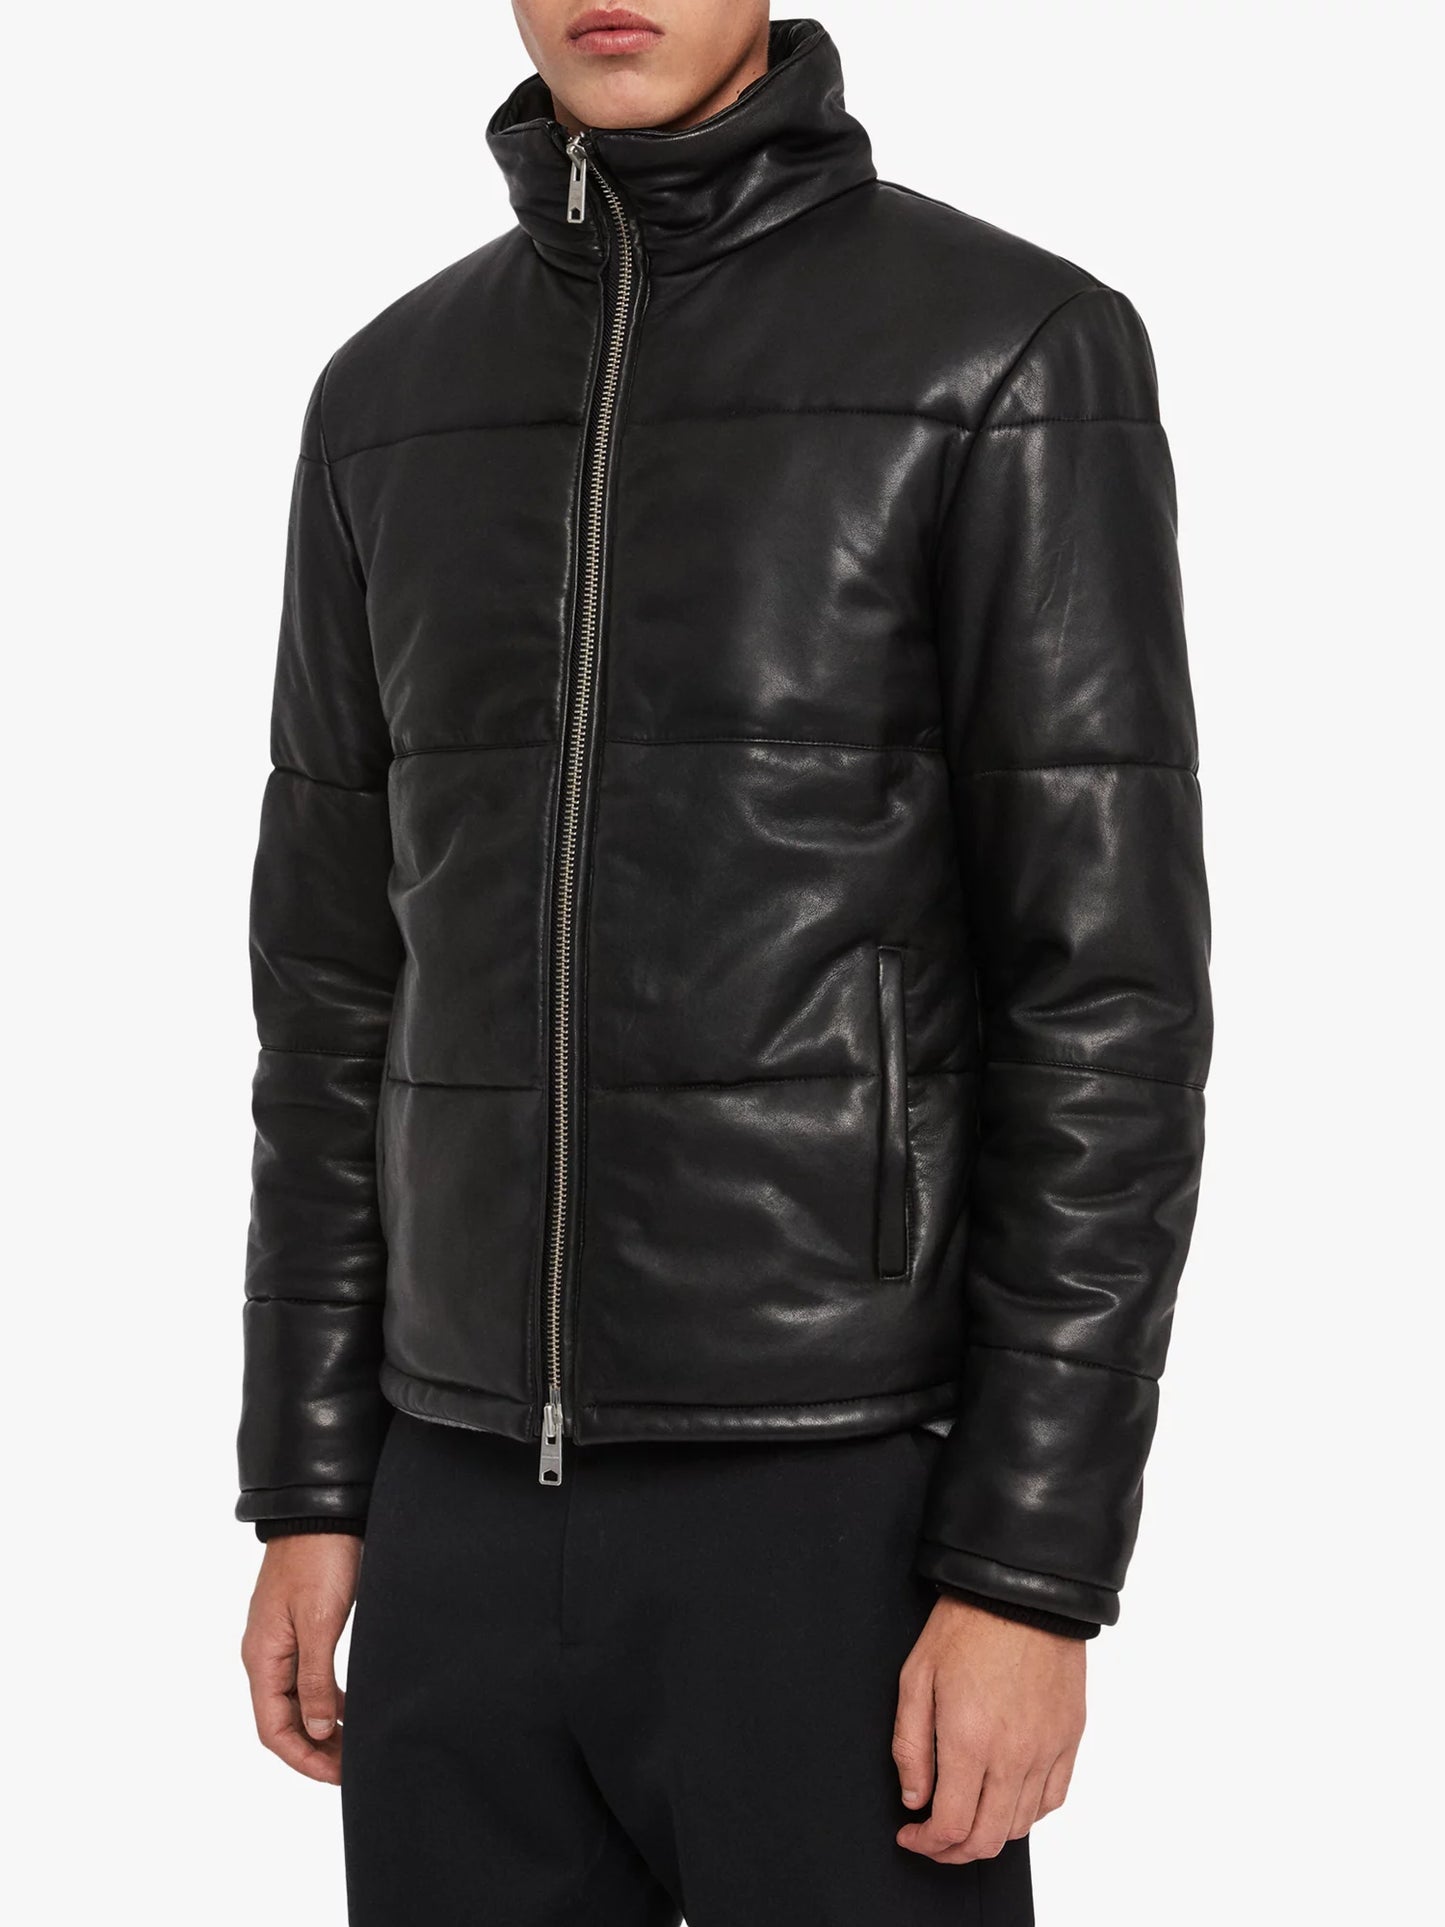 Black Puffer Leather Jacket for Men - Amine – Tango.